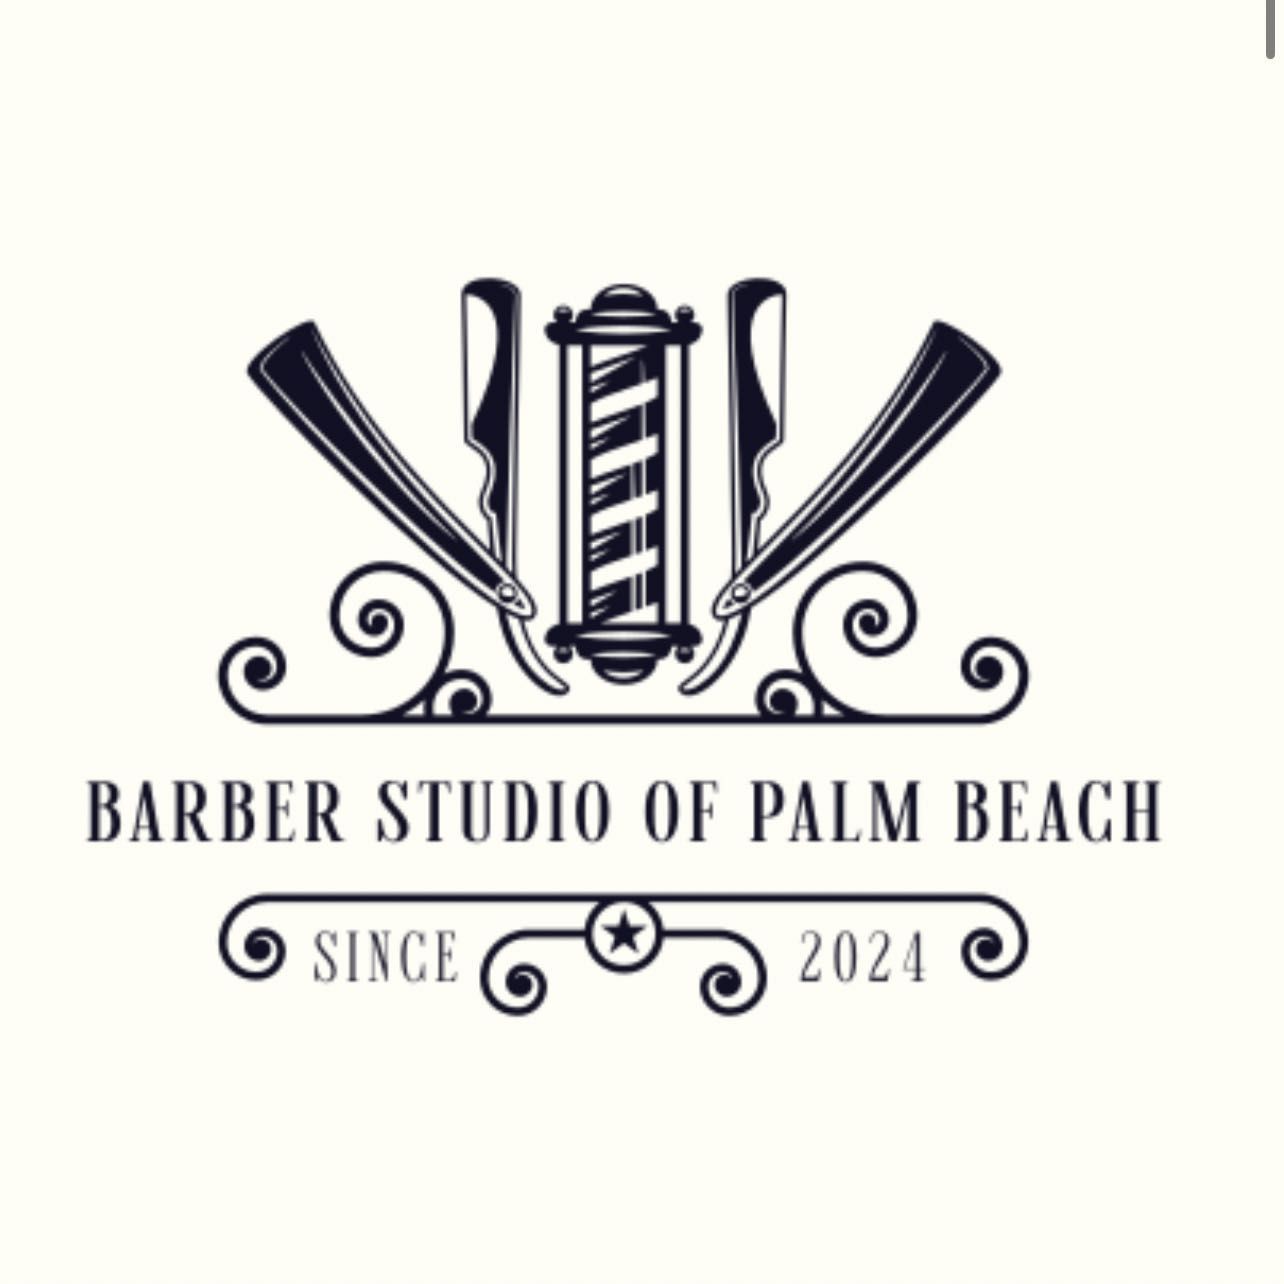 Barber Studio Of Palm Beach  Located Inside Salon By JC, 2807 South Dixie hwy, Suite 4, Barber Studio Of Palm Beach suite #4, West Palm Beach, 33405